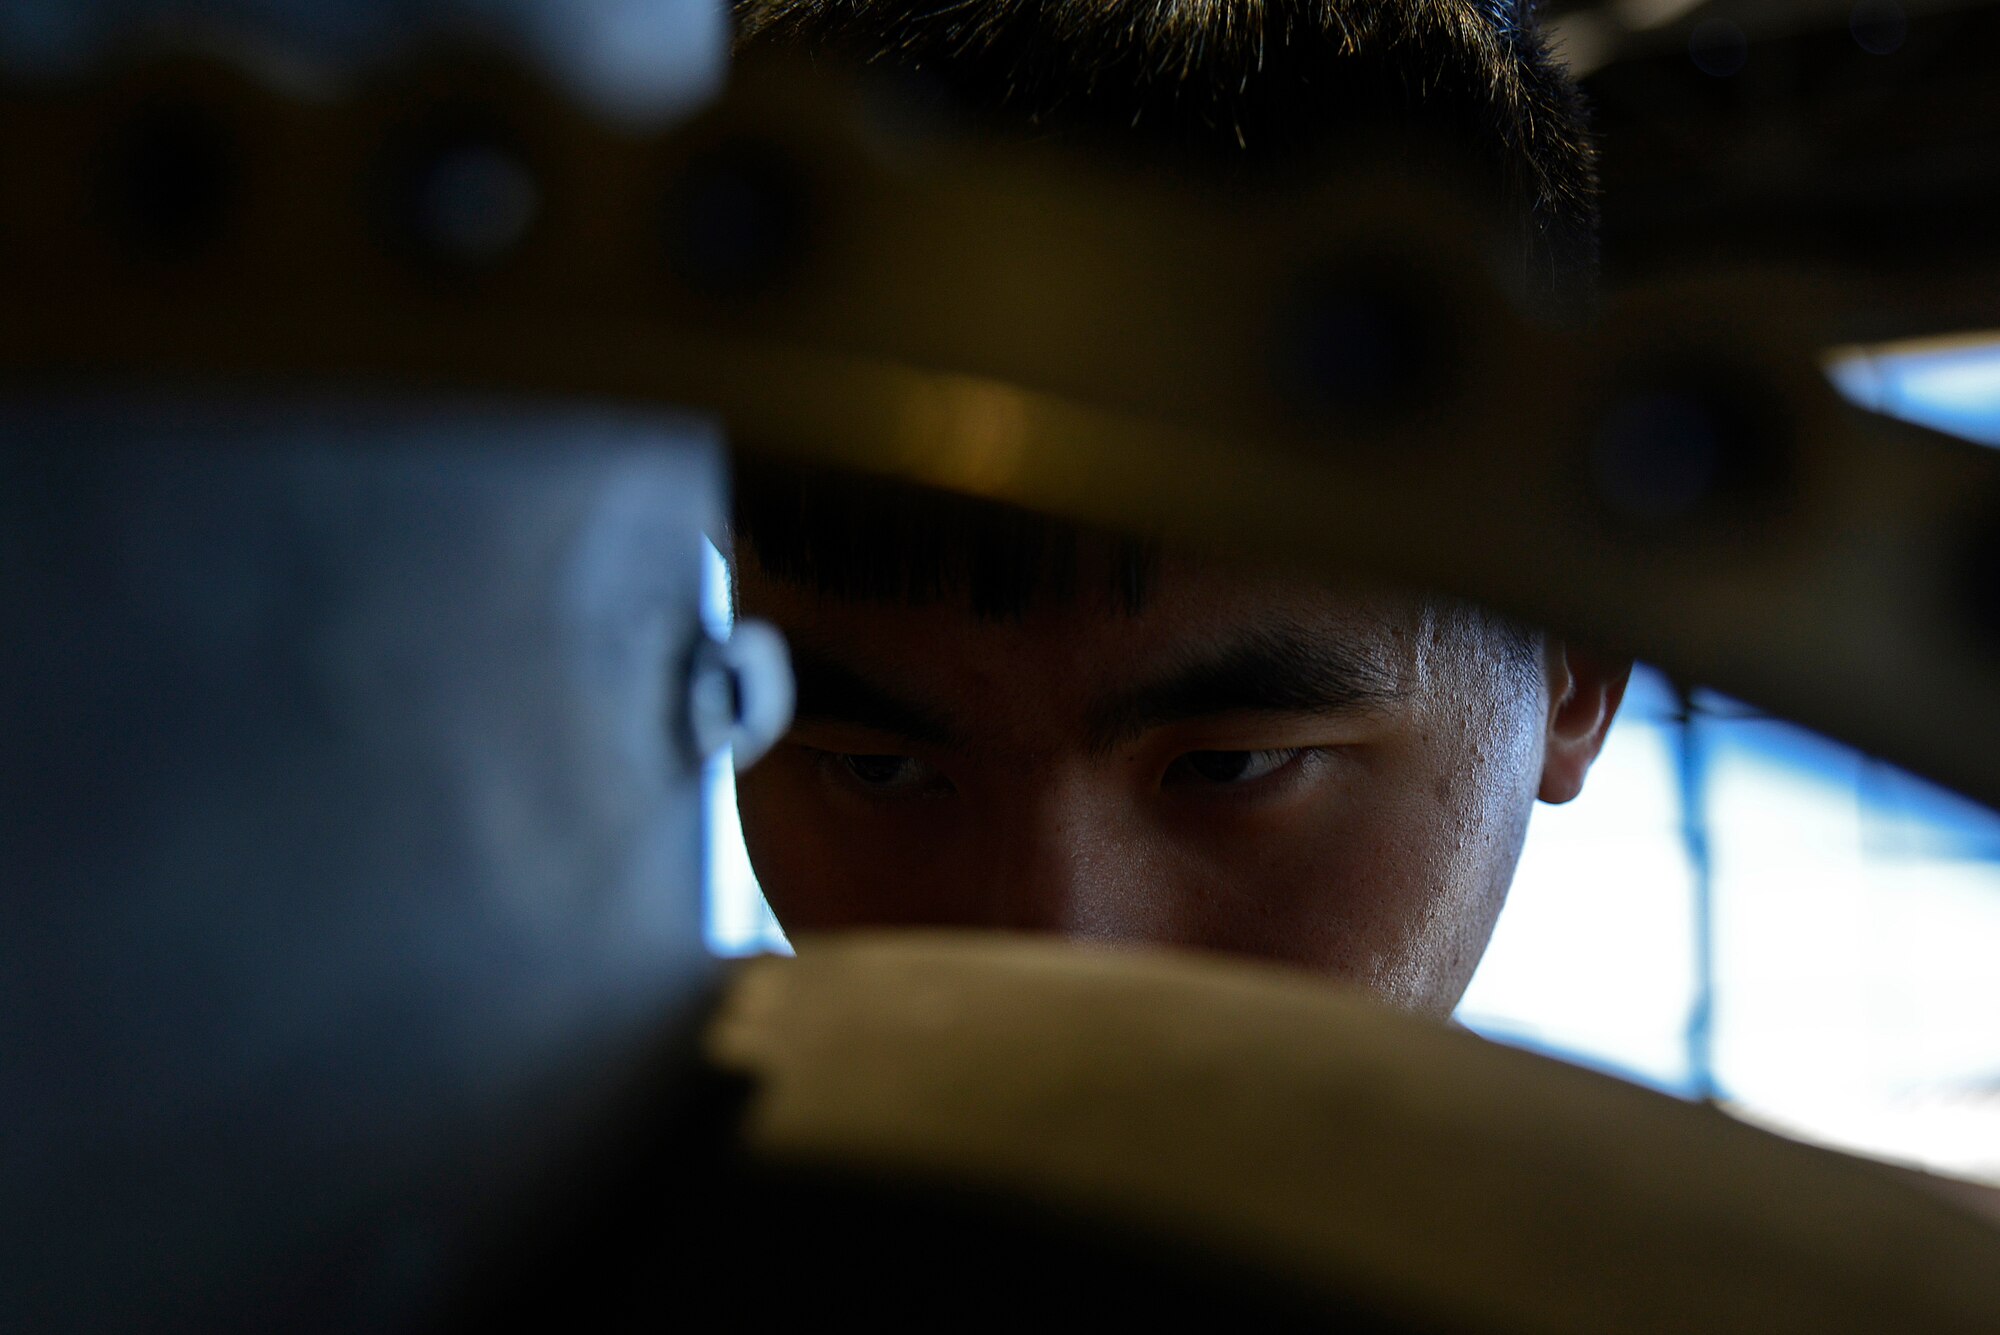 U.S. Air Force Senior Airman Monhuan Lee, 20th Component Maintenance Squadron aerospace propulsion journeyman works on the number three sump housing, which houses part of the F110-129D engine at Shaw Air Force Base, S.C., March 29, 2017. The number three sump housing is one of five sump housings that will be used when reassembling the F110-129D engine. (U.S. Air Force photo by Airman 1st Class BrieAnna Stillman)